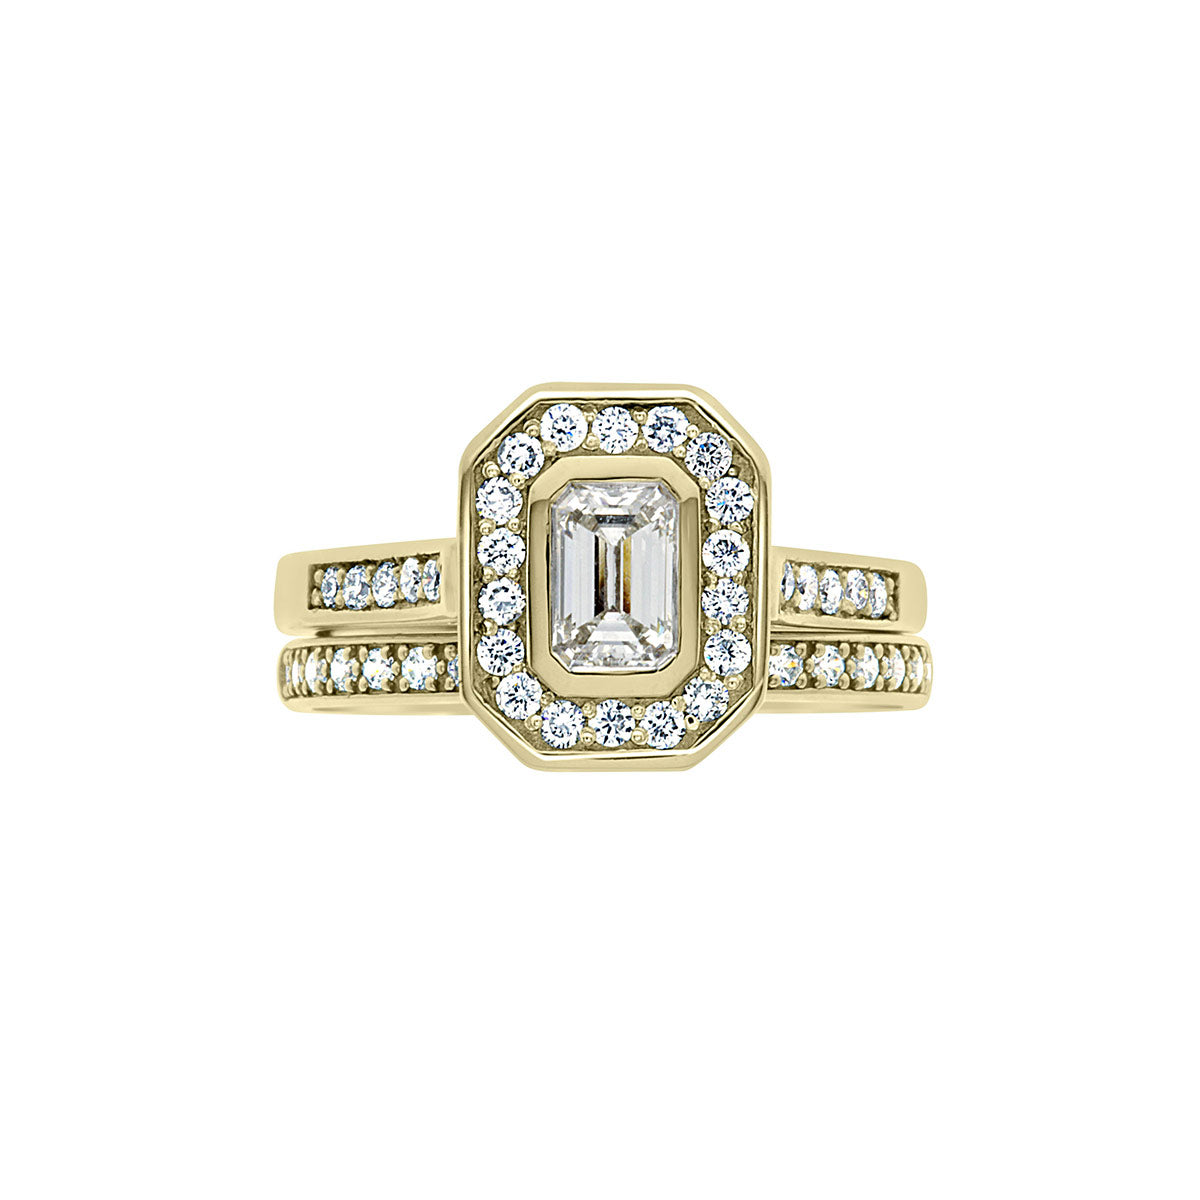 Emerald Cut Halo Ring in yellow gold with a matching diamond studded wedding ring